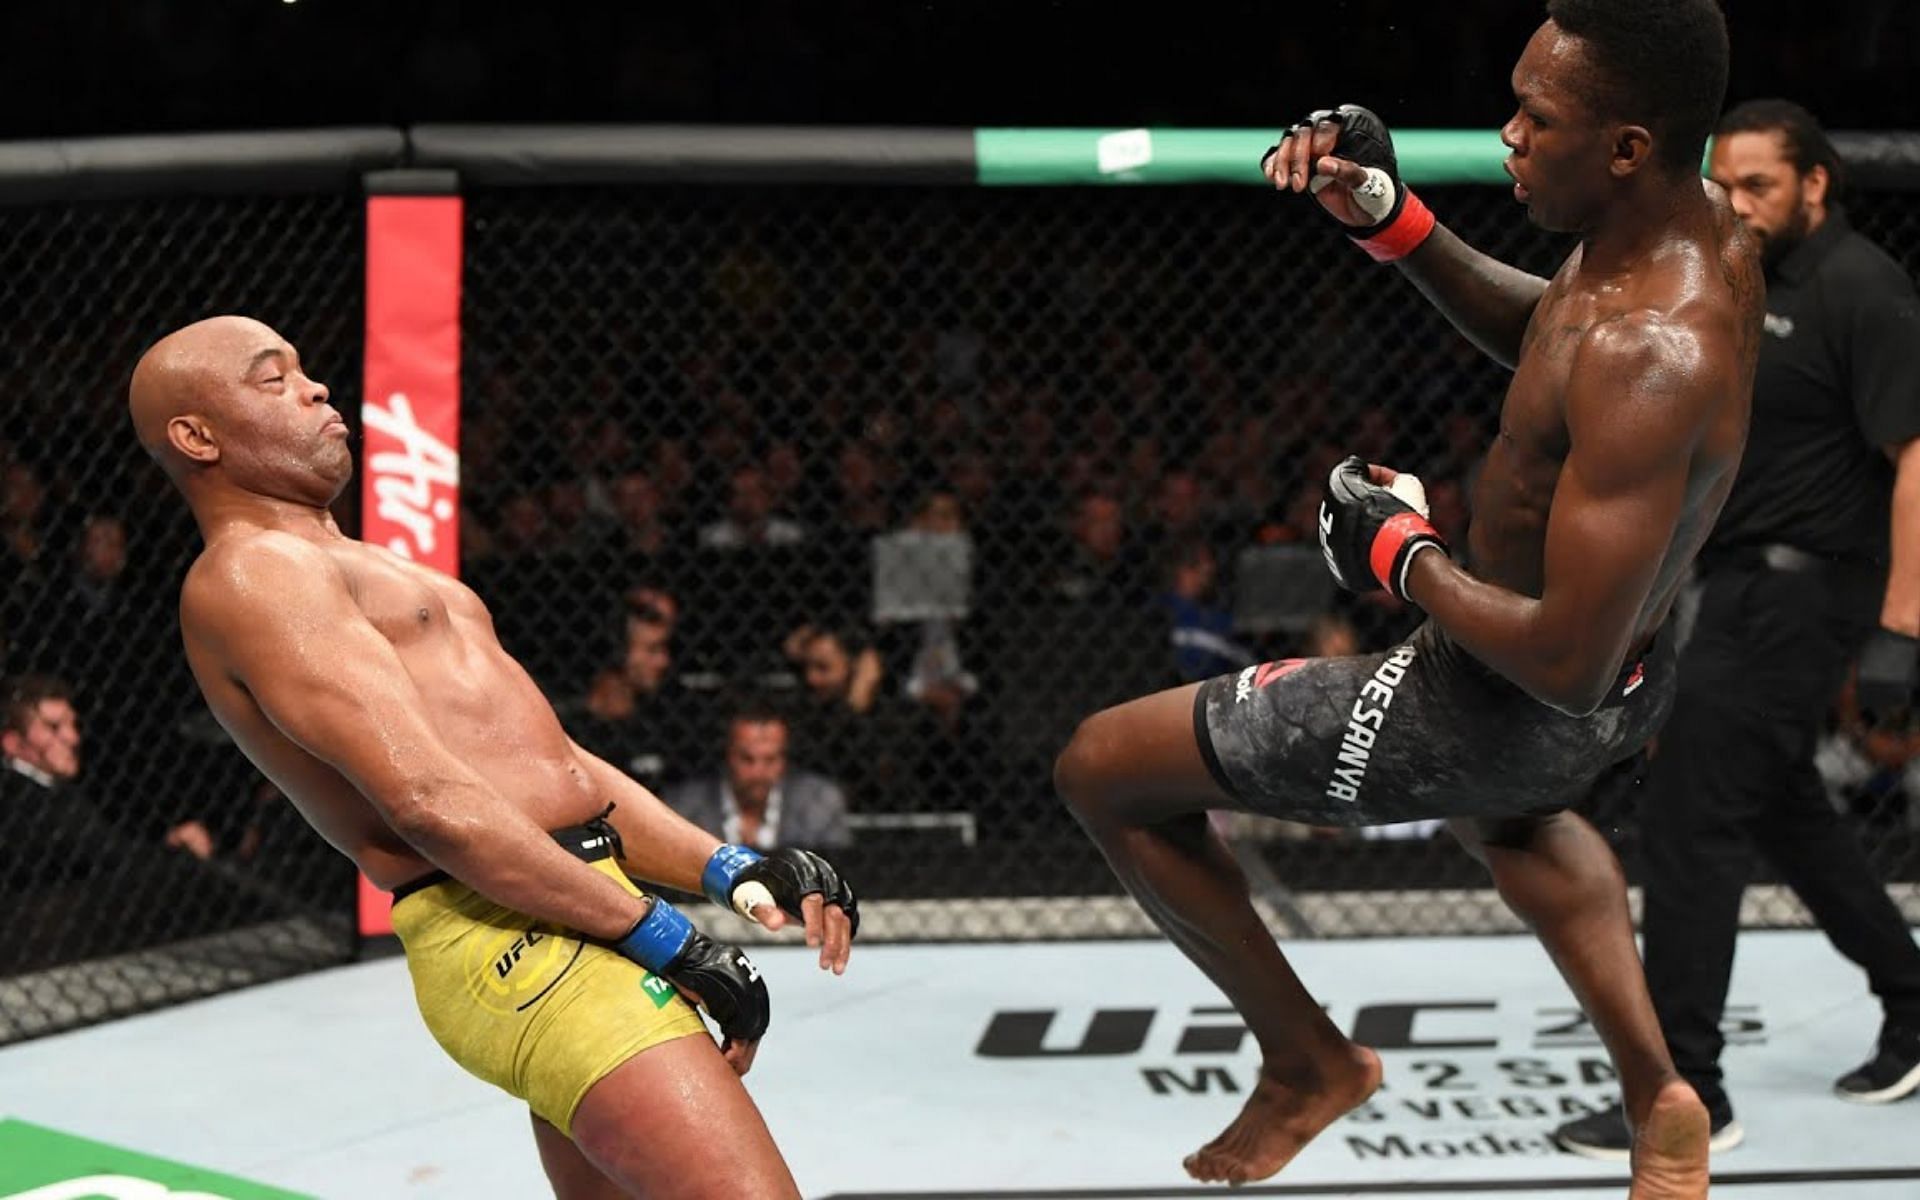 The comparisons between former middleweight kingpin Anderson Silva and current champ Israel Adesanya are easy to understand